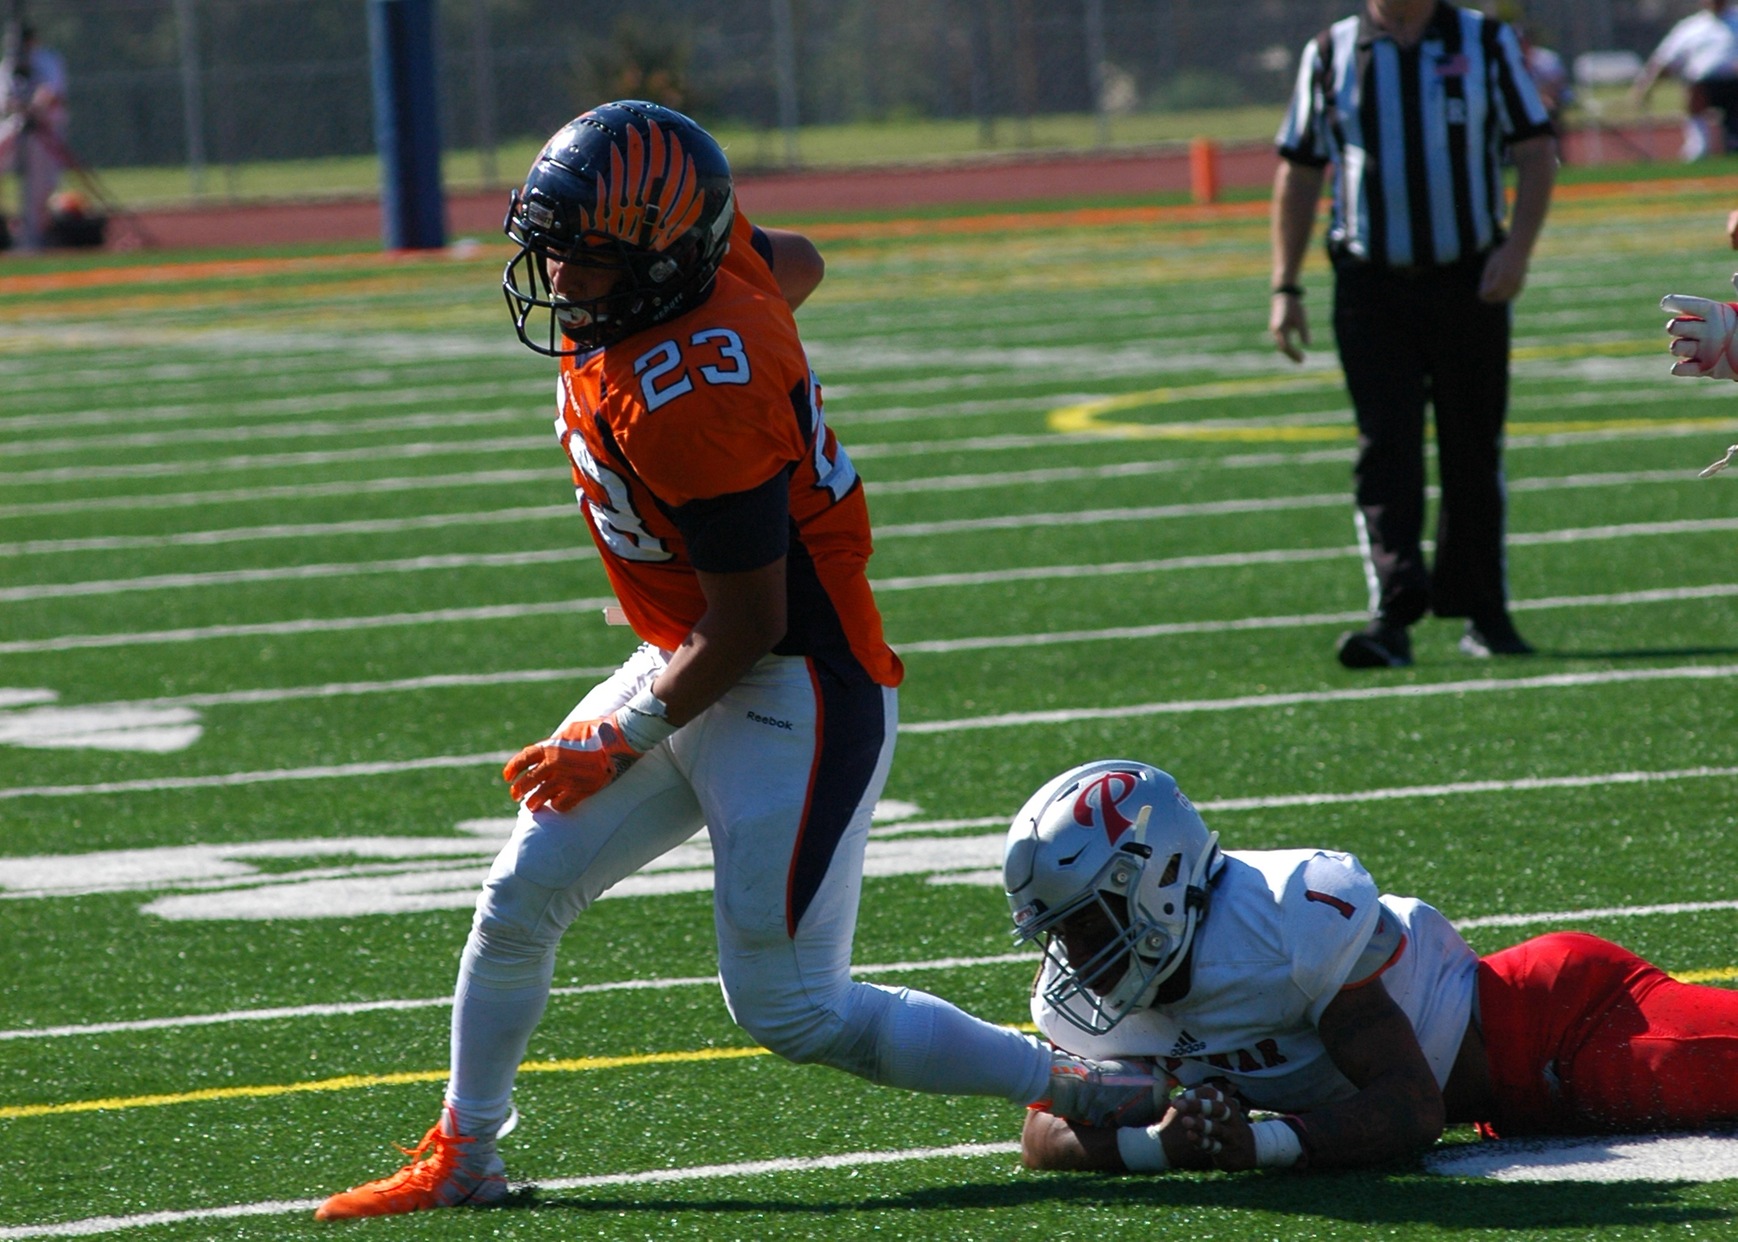 Running Back Sal Tovar breaks free from an opponent defender in action earlier this fall. Image: Thomas Garcia